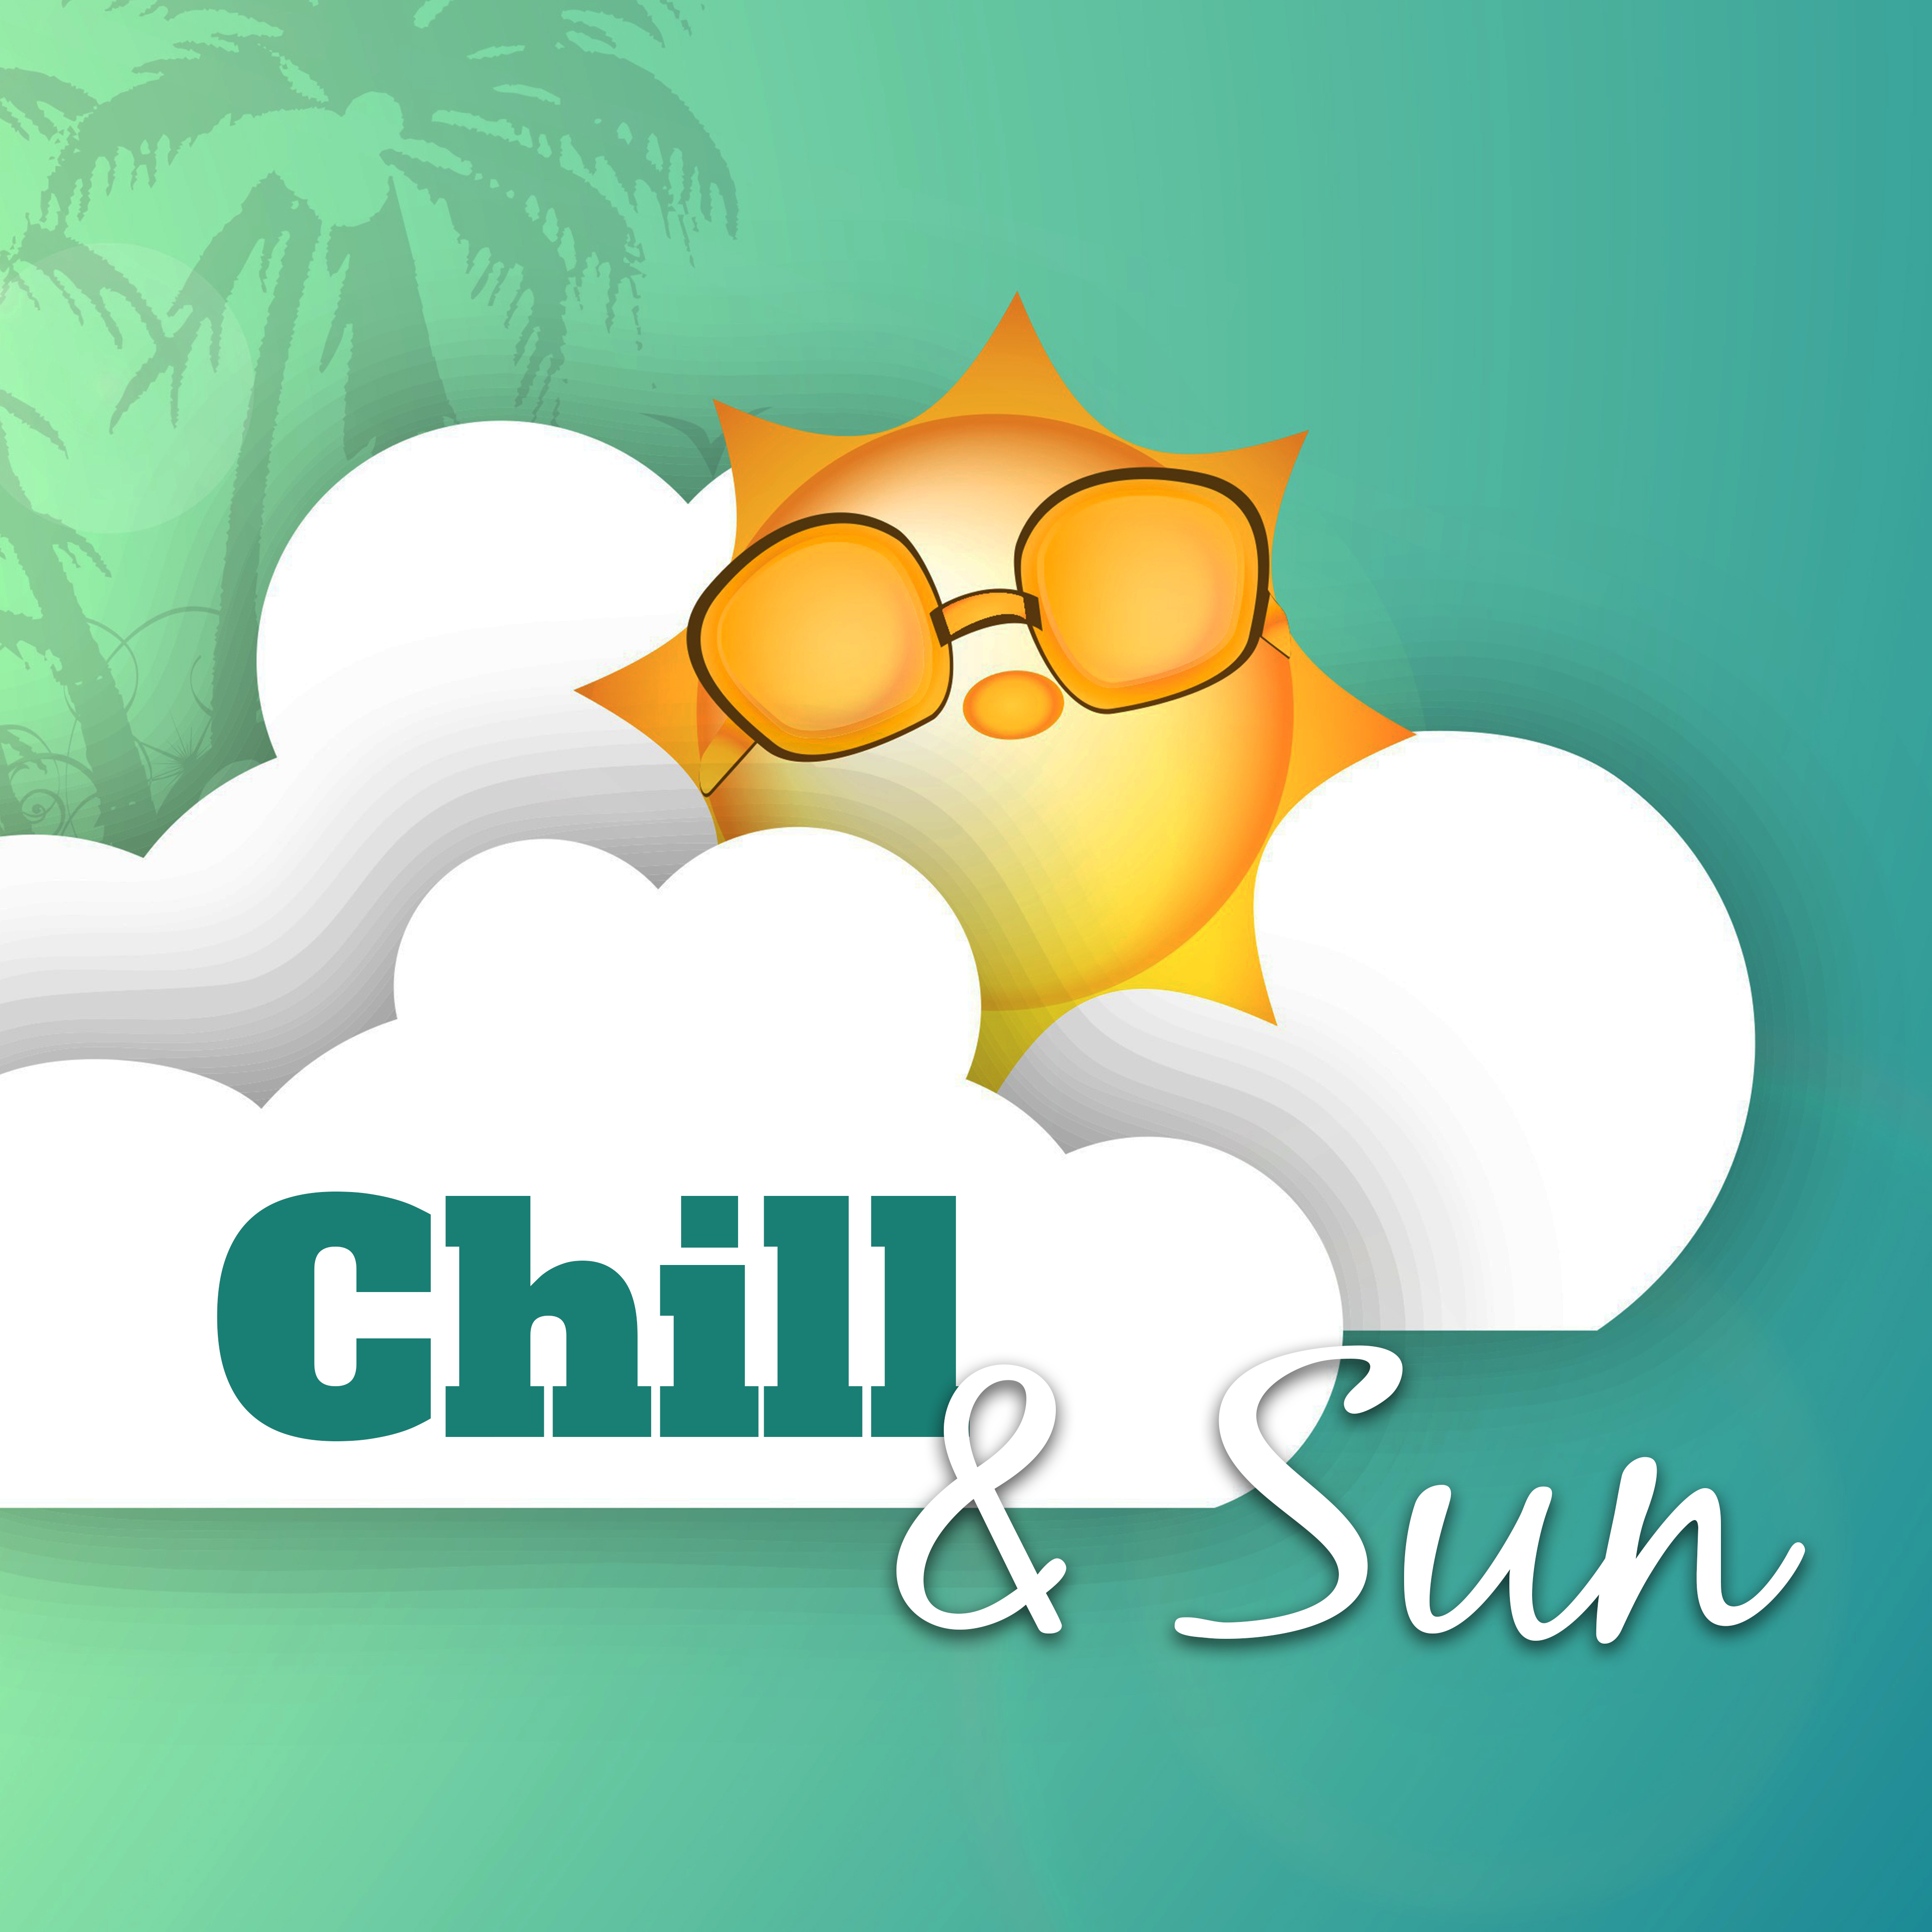 Chill & Sun – Ibiza Summertime, Sunrise Feeling, Ambient Summer, Holiday Vibes, Relax Under Palms, Bar Chill Out